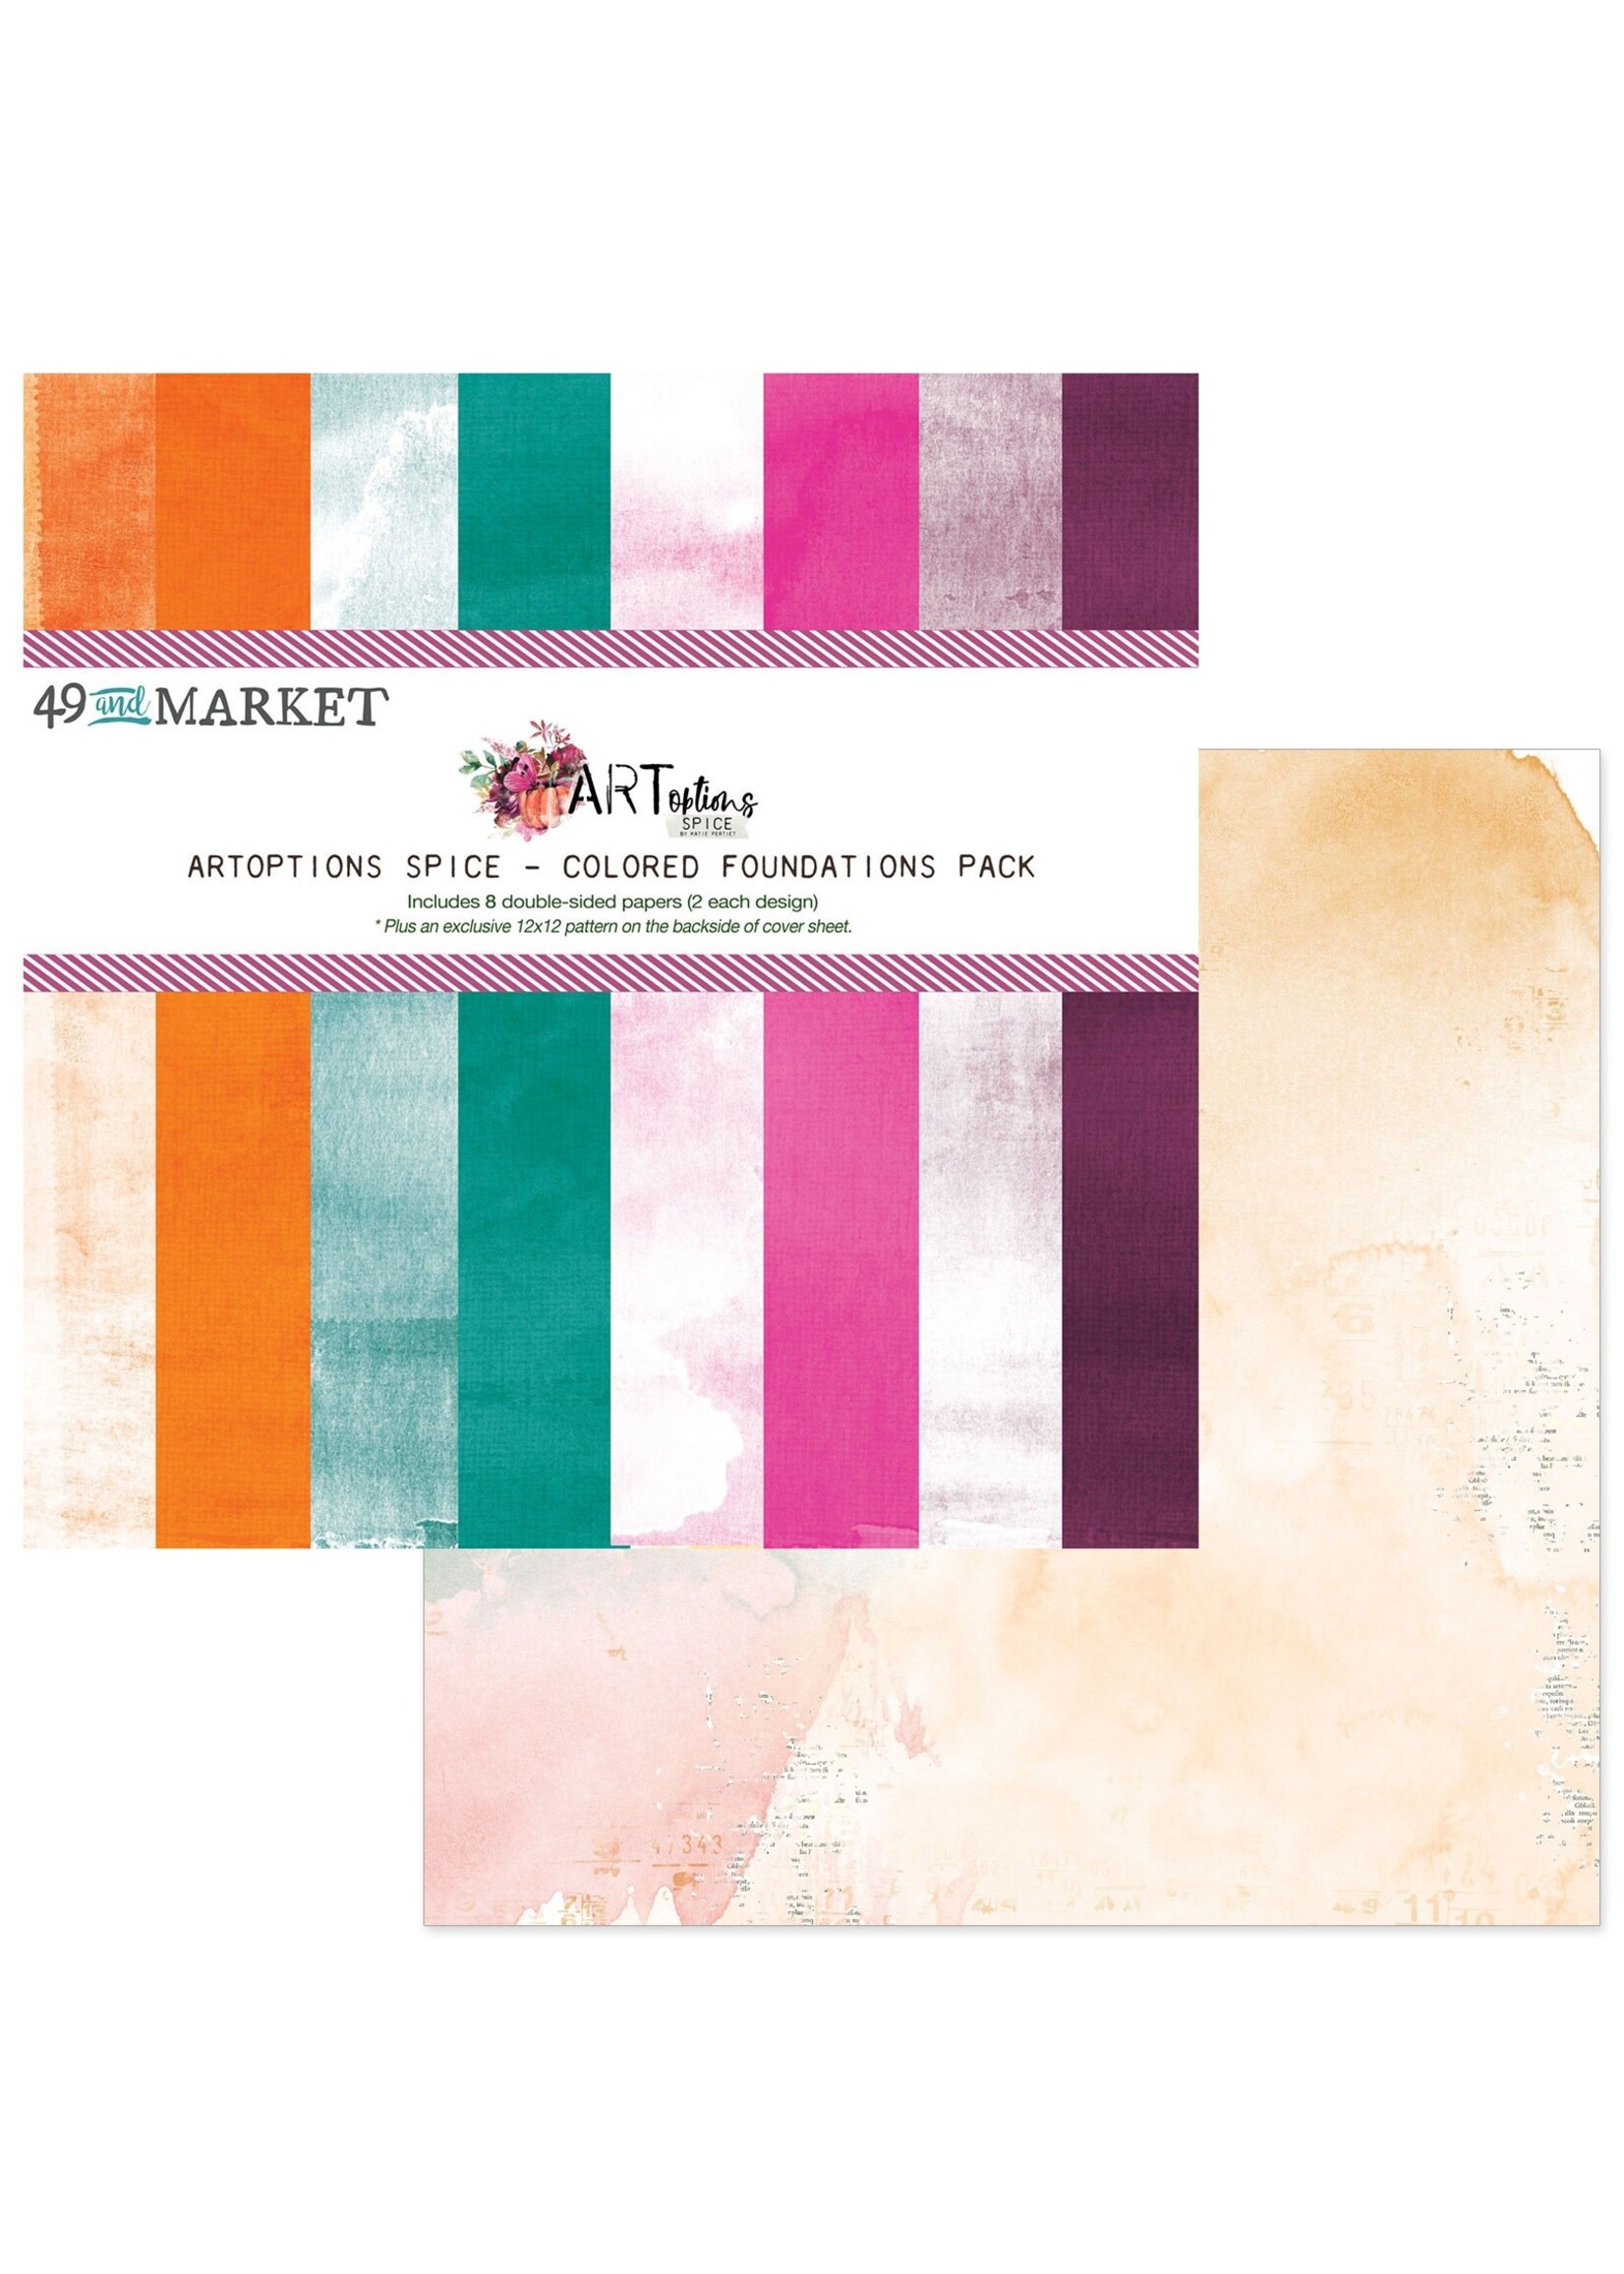 49 and Market 49 And Market Collection Pack 12"X12"-ARToptions Spice Colored Foundations